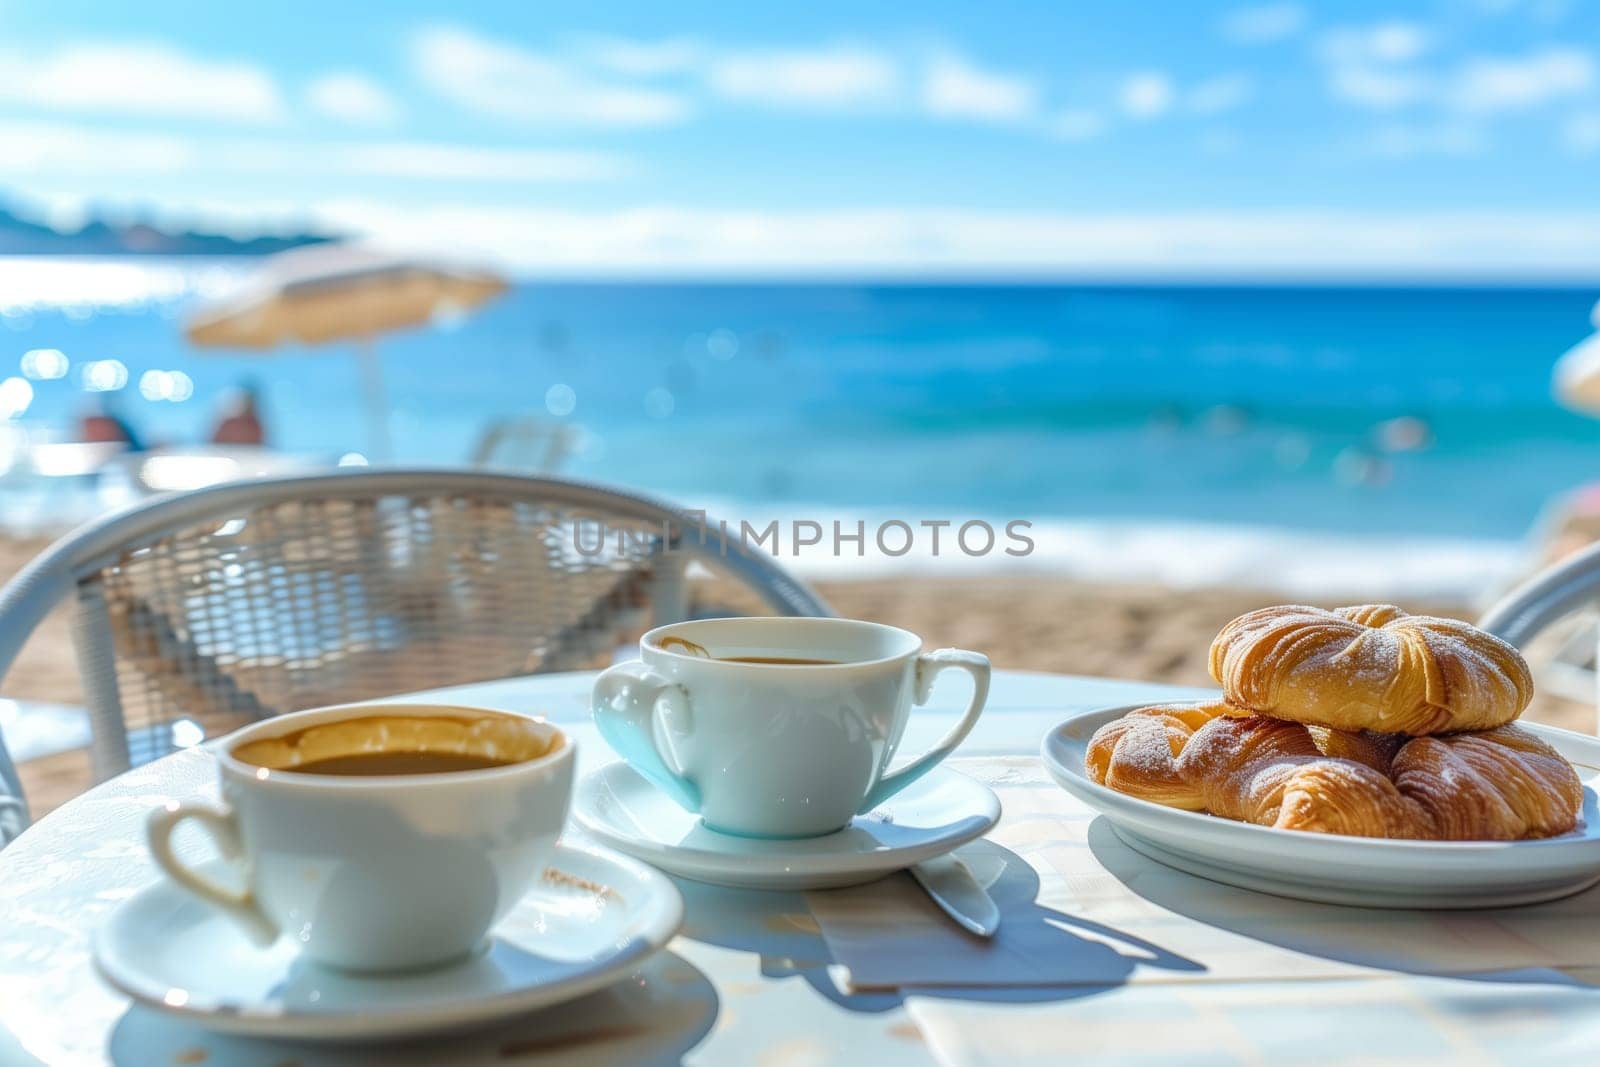 Two cups of coffee and croissants on a table by the beach, with the sound of waves in the background and a picturesque view of the ocean and sky